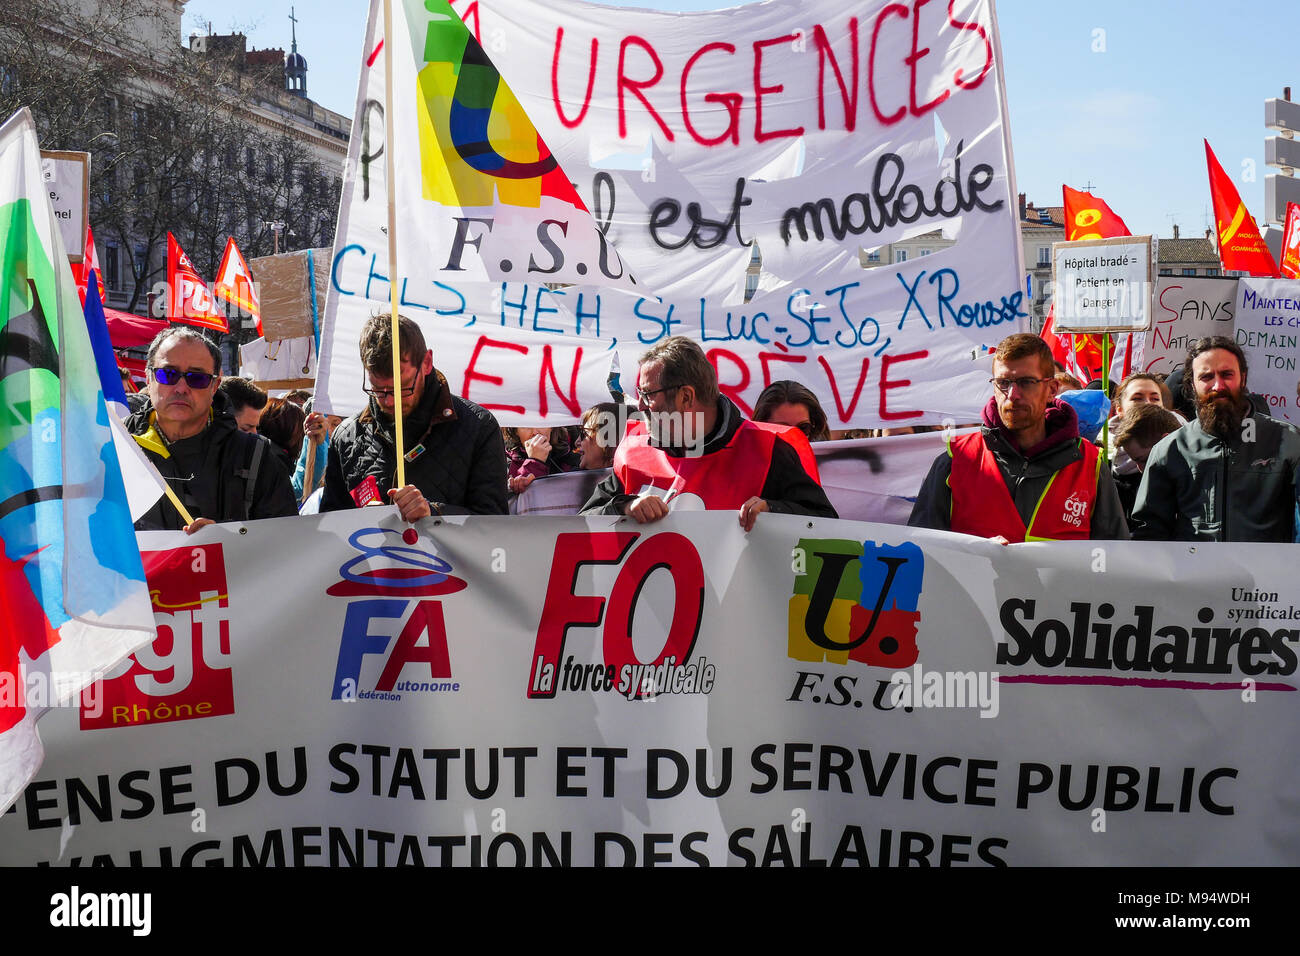 Lyon, France, 22nd March 2018: Called by trade unions and left wing parties, protesters including school and hospital staff, civil servants, rail workers, students and collegians, are seen in Lyon (Central-Eastern France) on March 22, 2018, as they take part in a demonstration held against French government's string of reforms.  In Lyon, the number of the demonstrators was estimated to more or less 10 000 people, according to the Police. Credit: Serge Mouraret/Alamy Live News Stock Photo